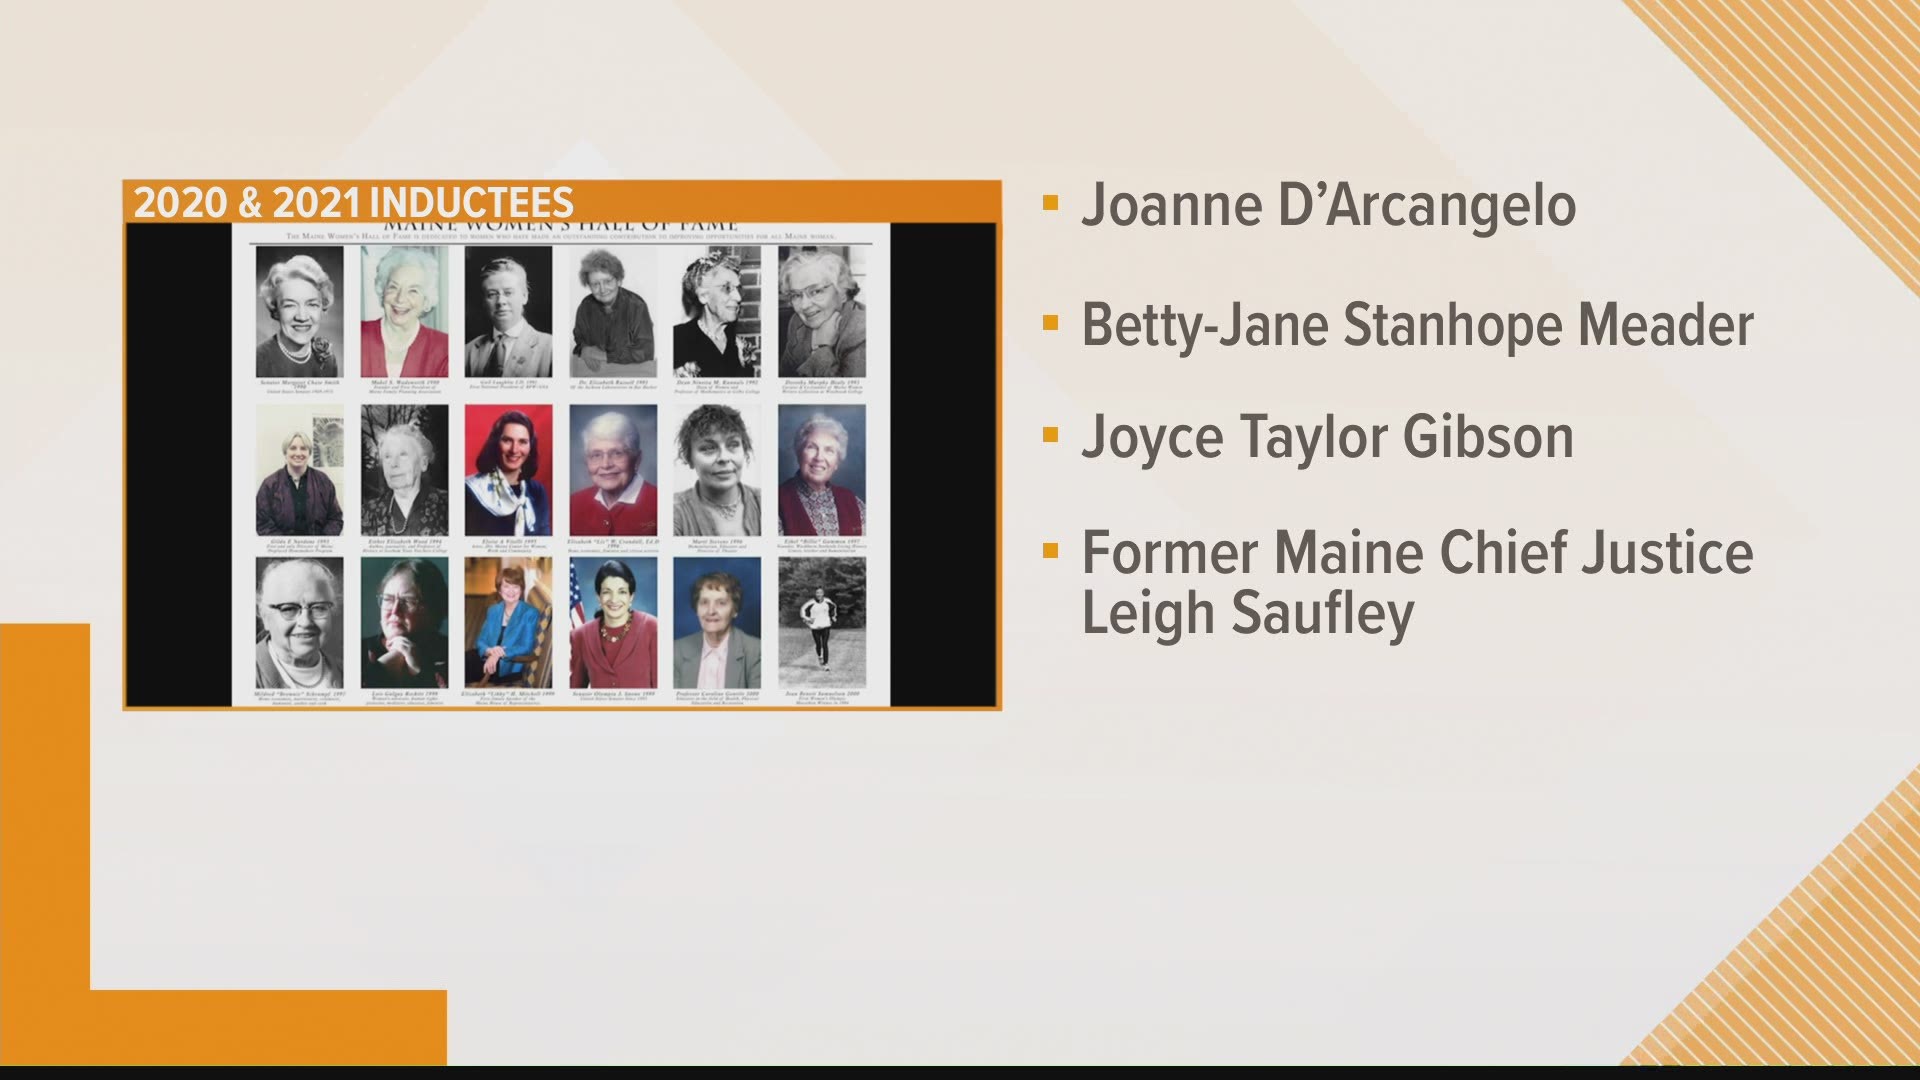 The inductees include Joanne D’Arcangelo, Betty-Jane Stanhope Meader, Joyce Taylor Gibson, former Maine Supreme Court Chief Justice Leigh Saufley